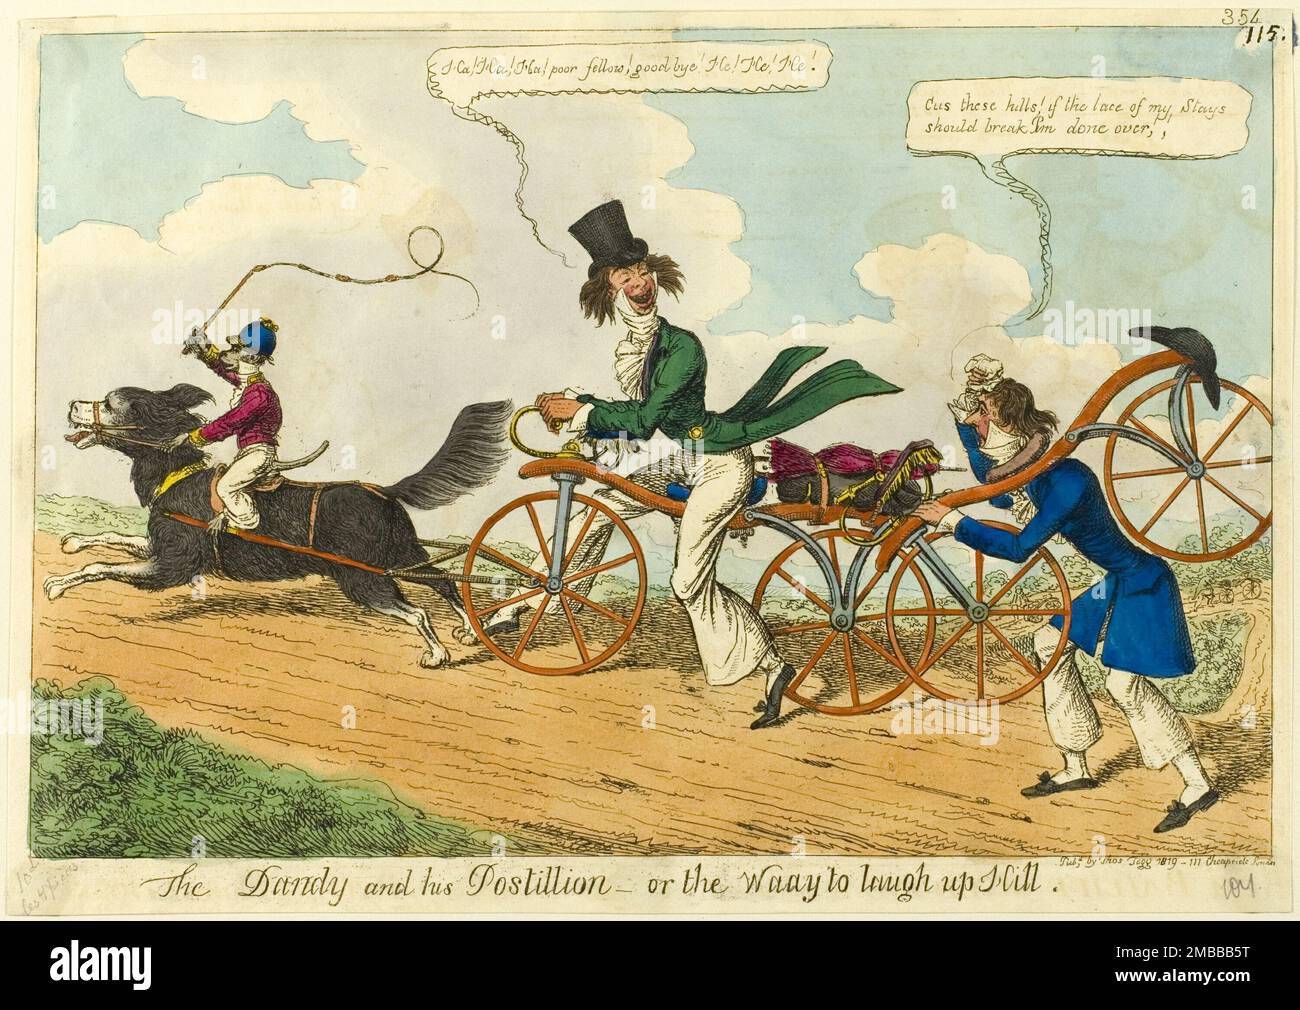 The Dandy and His Postillion - or the Waay to Laugh Up Hill, 1819. 'Ha! Ha! Ha! poor fellow! goodbye! He! He! He!'. 'Cus these hills! If the lace of my Stays should break I'm done over'. The hobby horse was a forerunner of the bicycle. It lacked pedals and gears, and had to be carried up hills. One enterprising rider has attached a dog (with monkey postilion) to his vehicle, and is being pulled uphill. Attributed to William Heath. Stock Photo